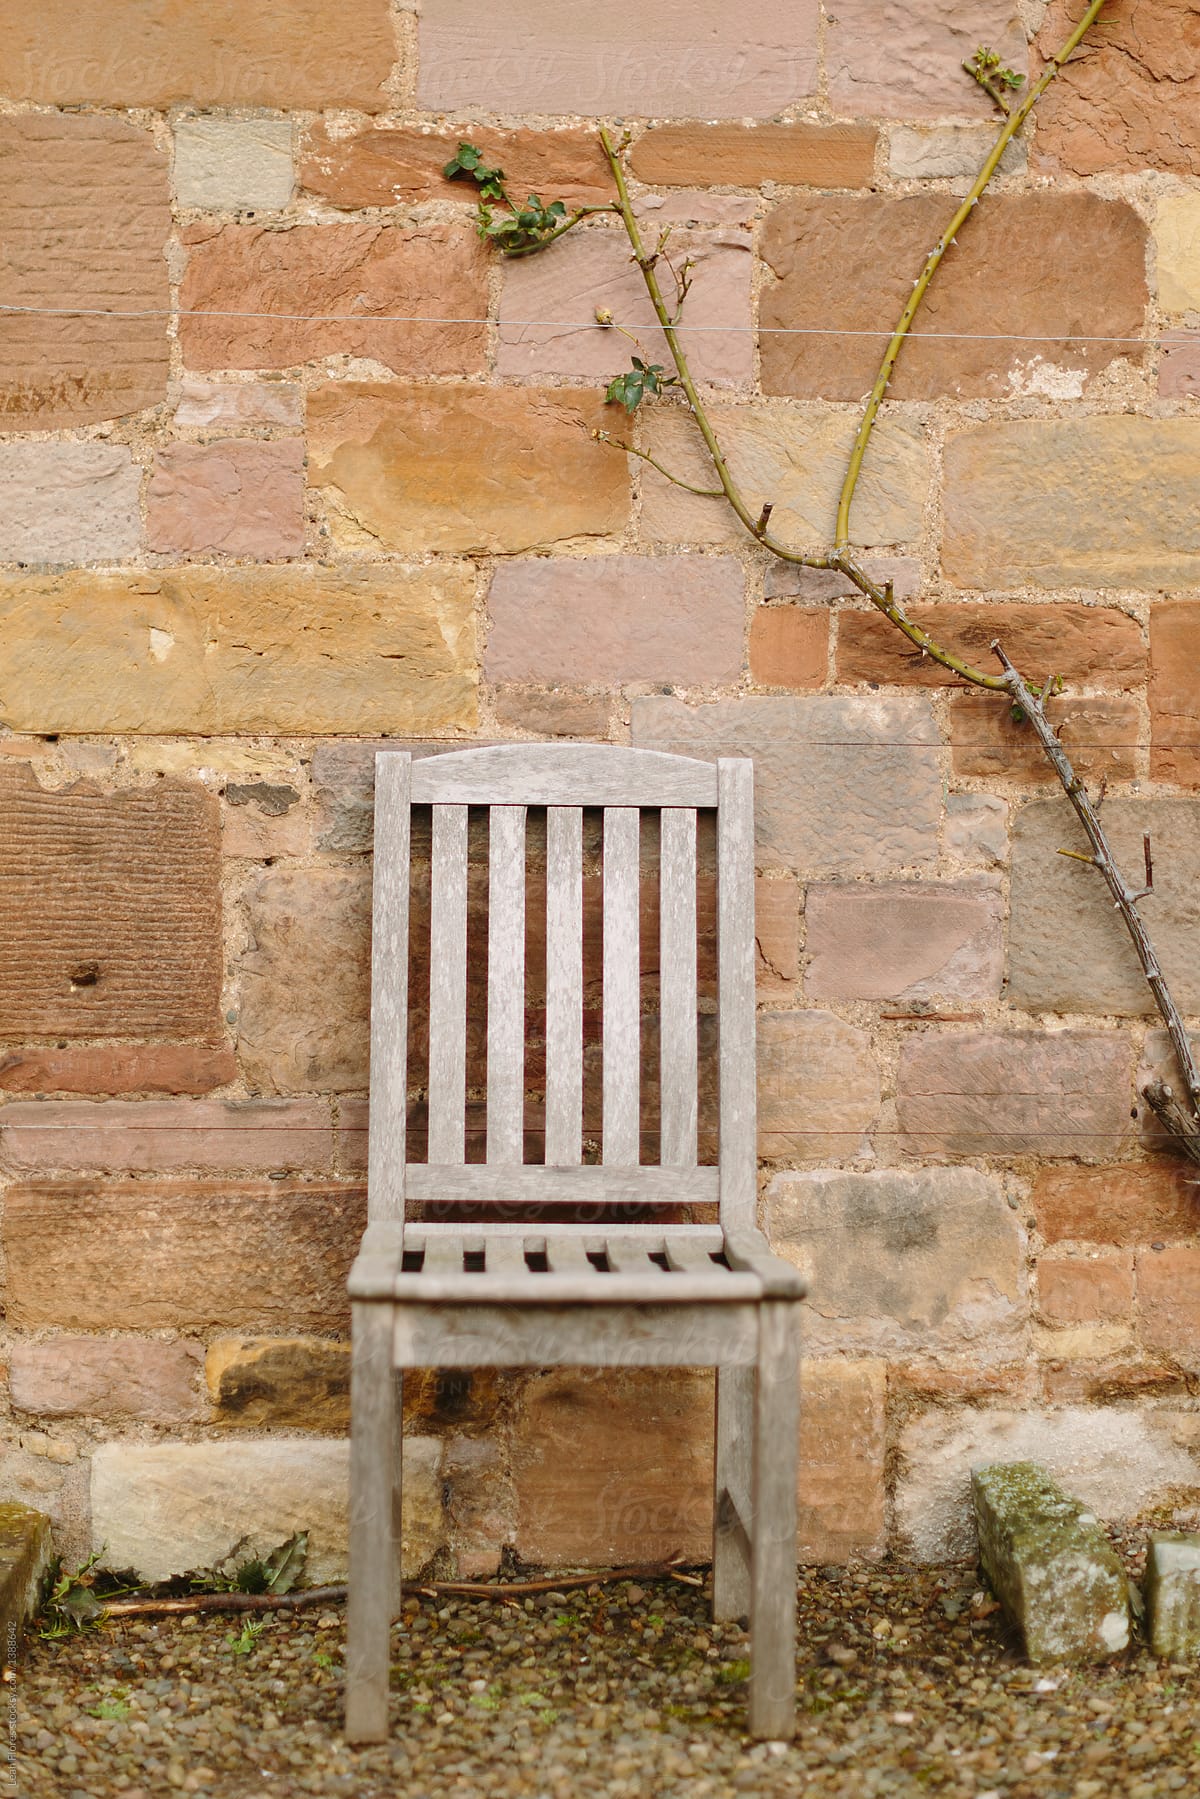 Empty Chair against Brick Wall and Vines